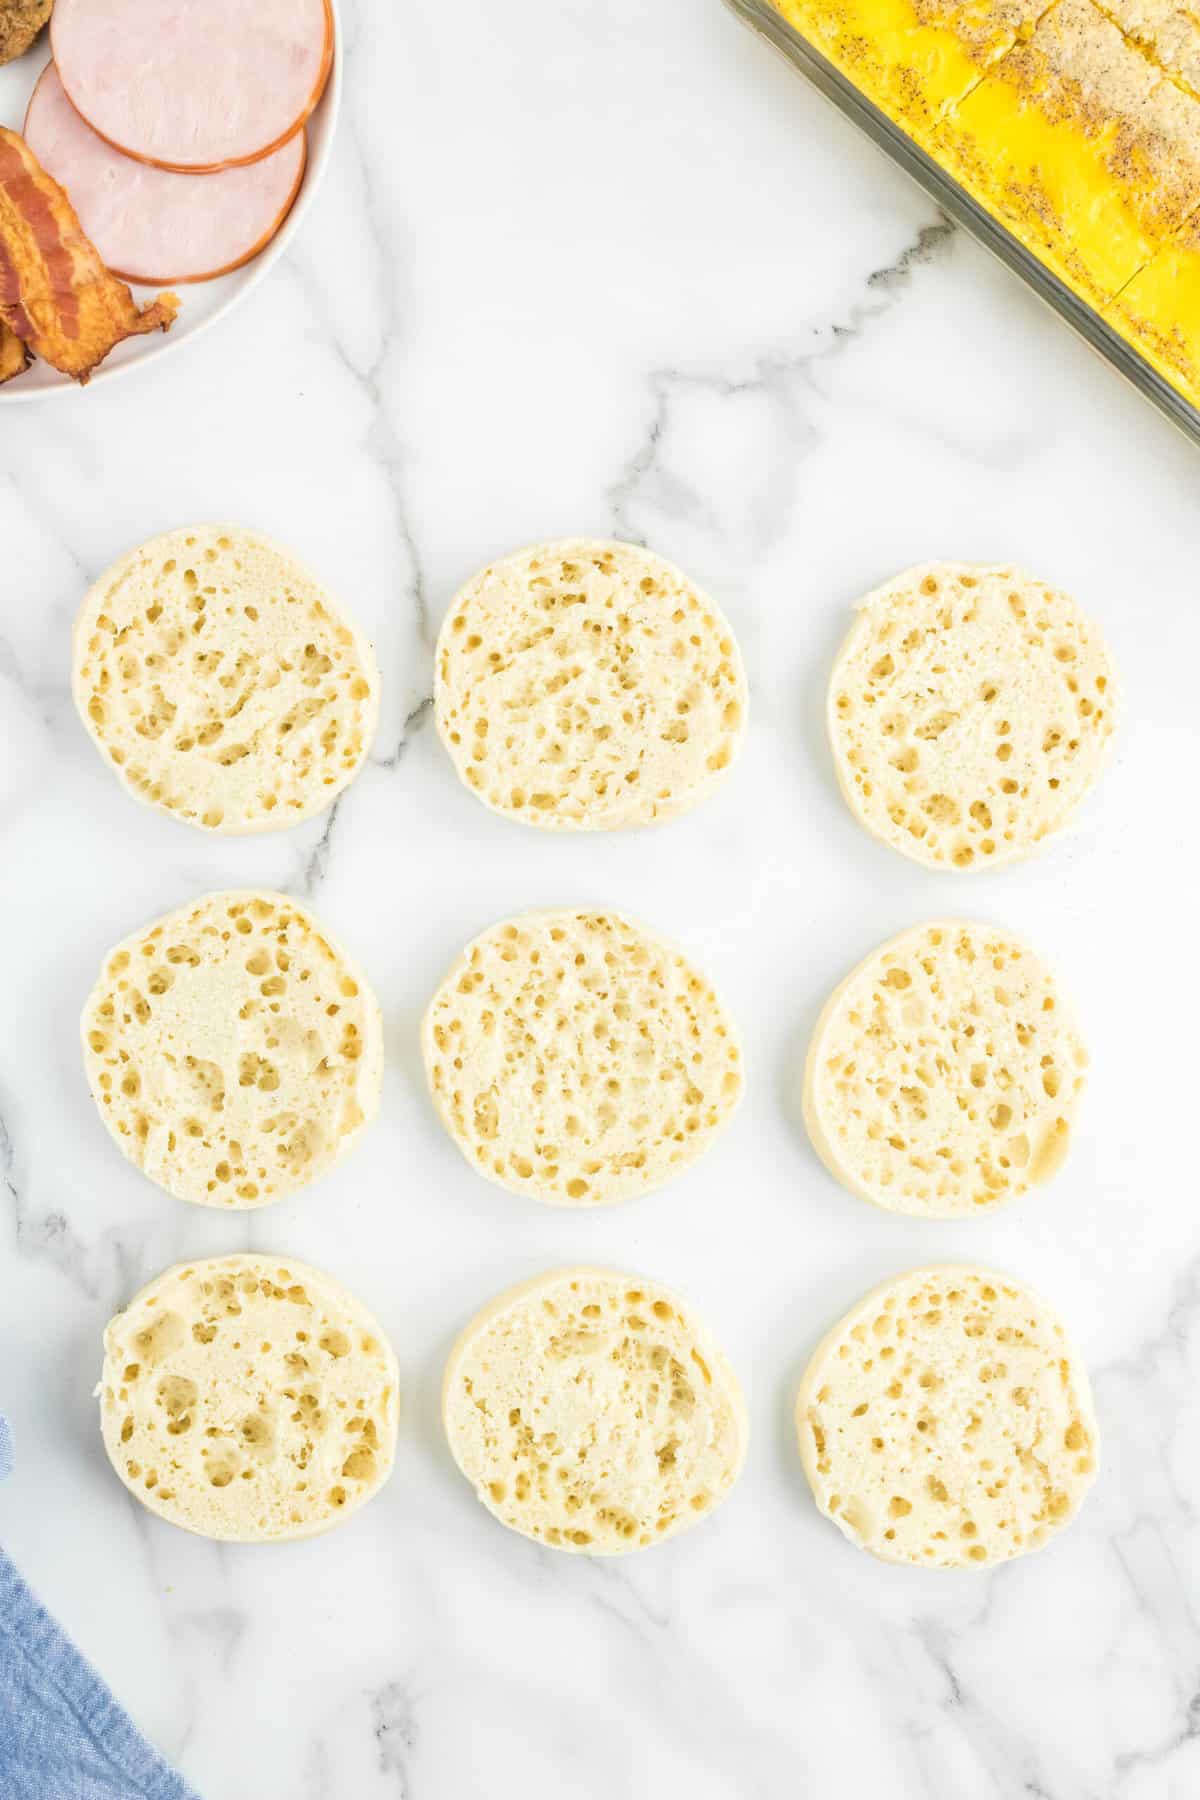 Sliced open facing English muffins for Freezer Breakfast Sandwiches